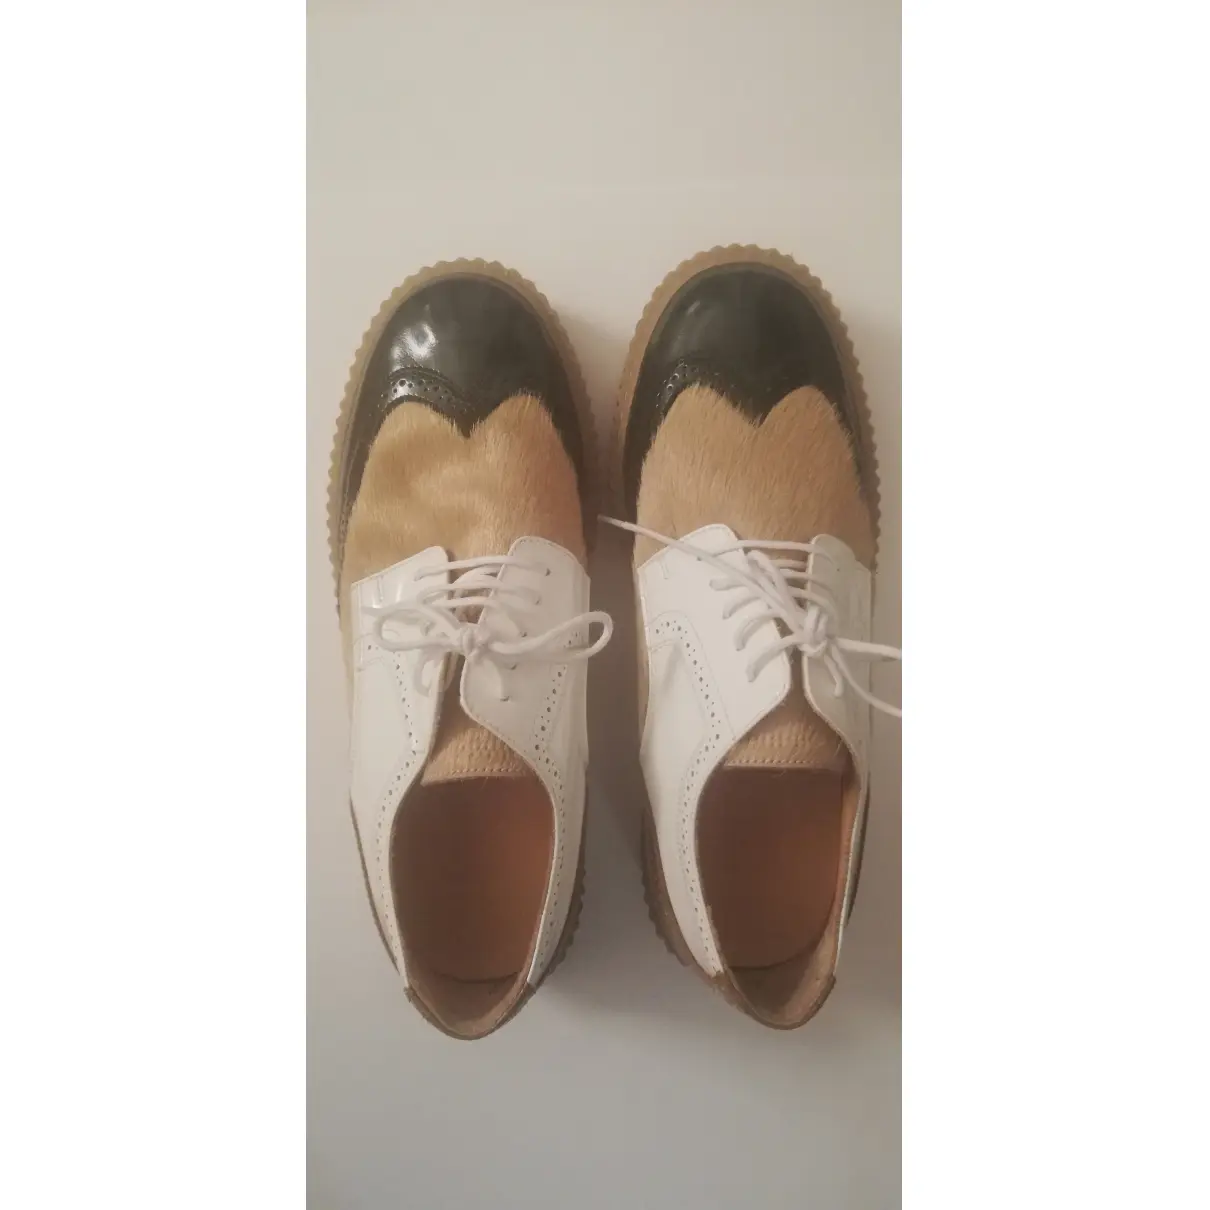 Buy MM6 Patent leather lace ups online